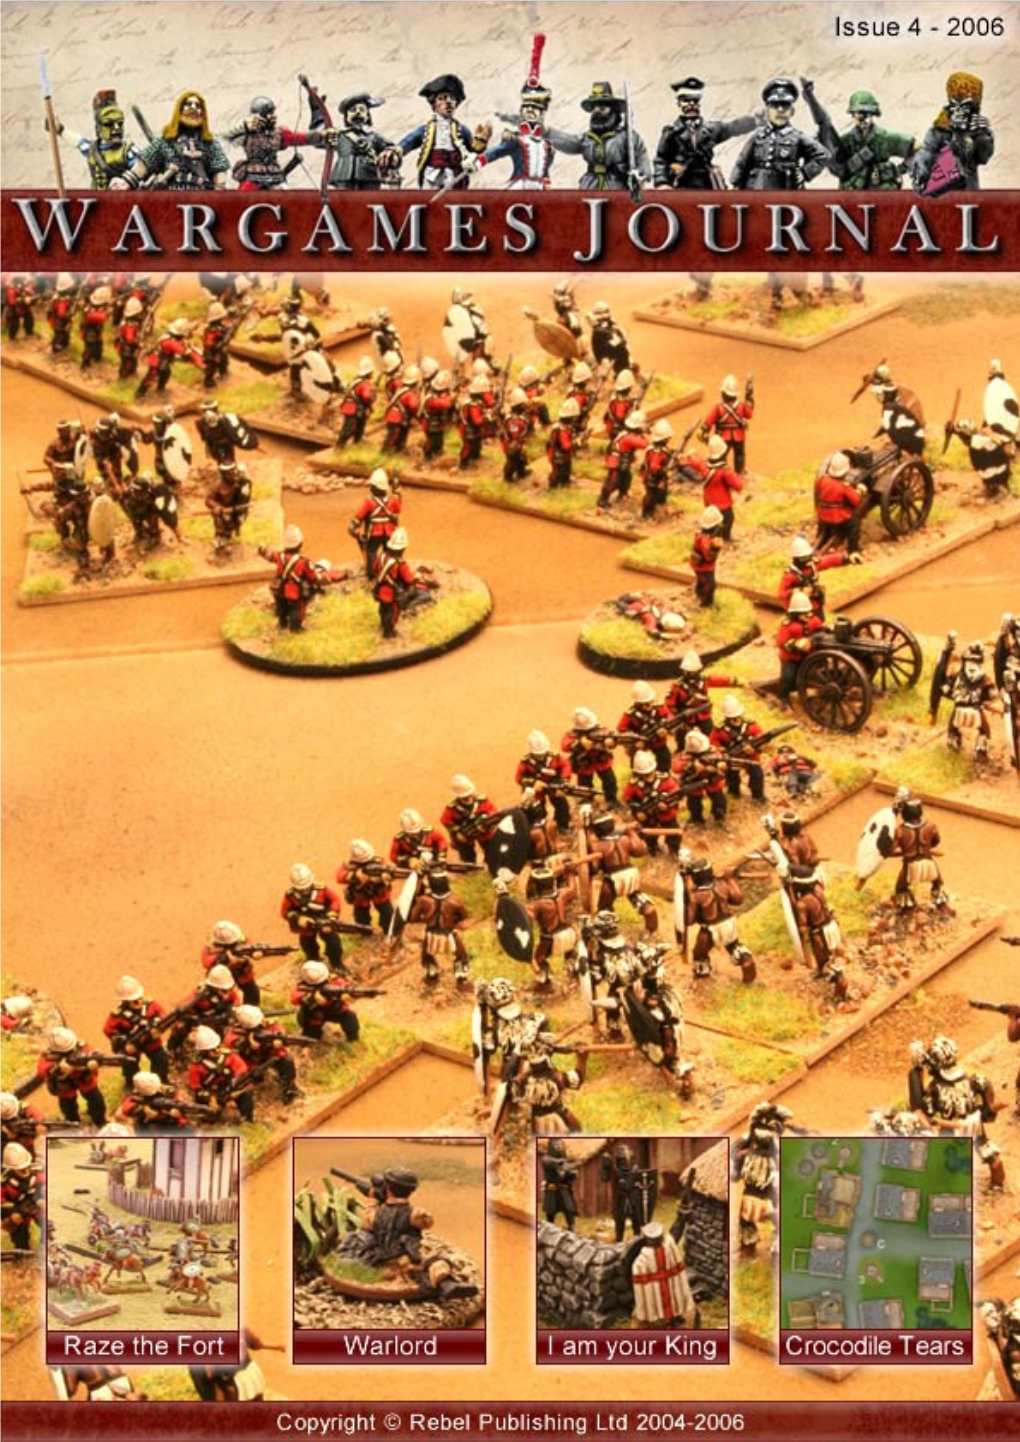 Issue 4 of Wargames Journal